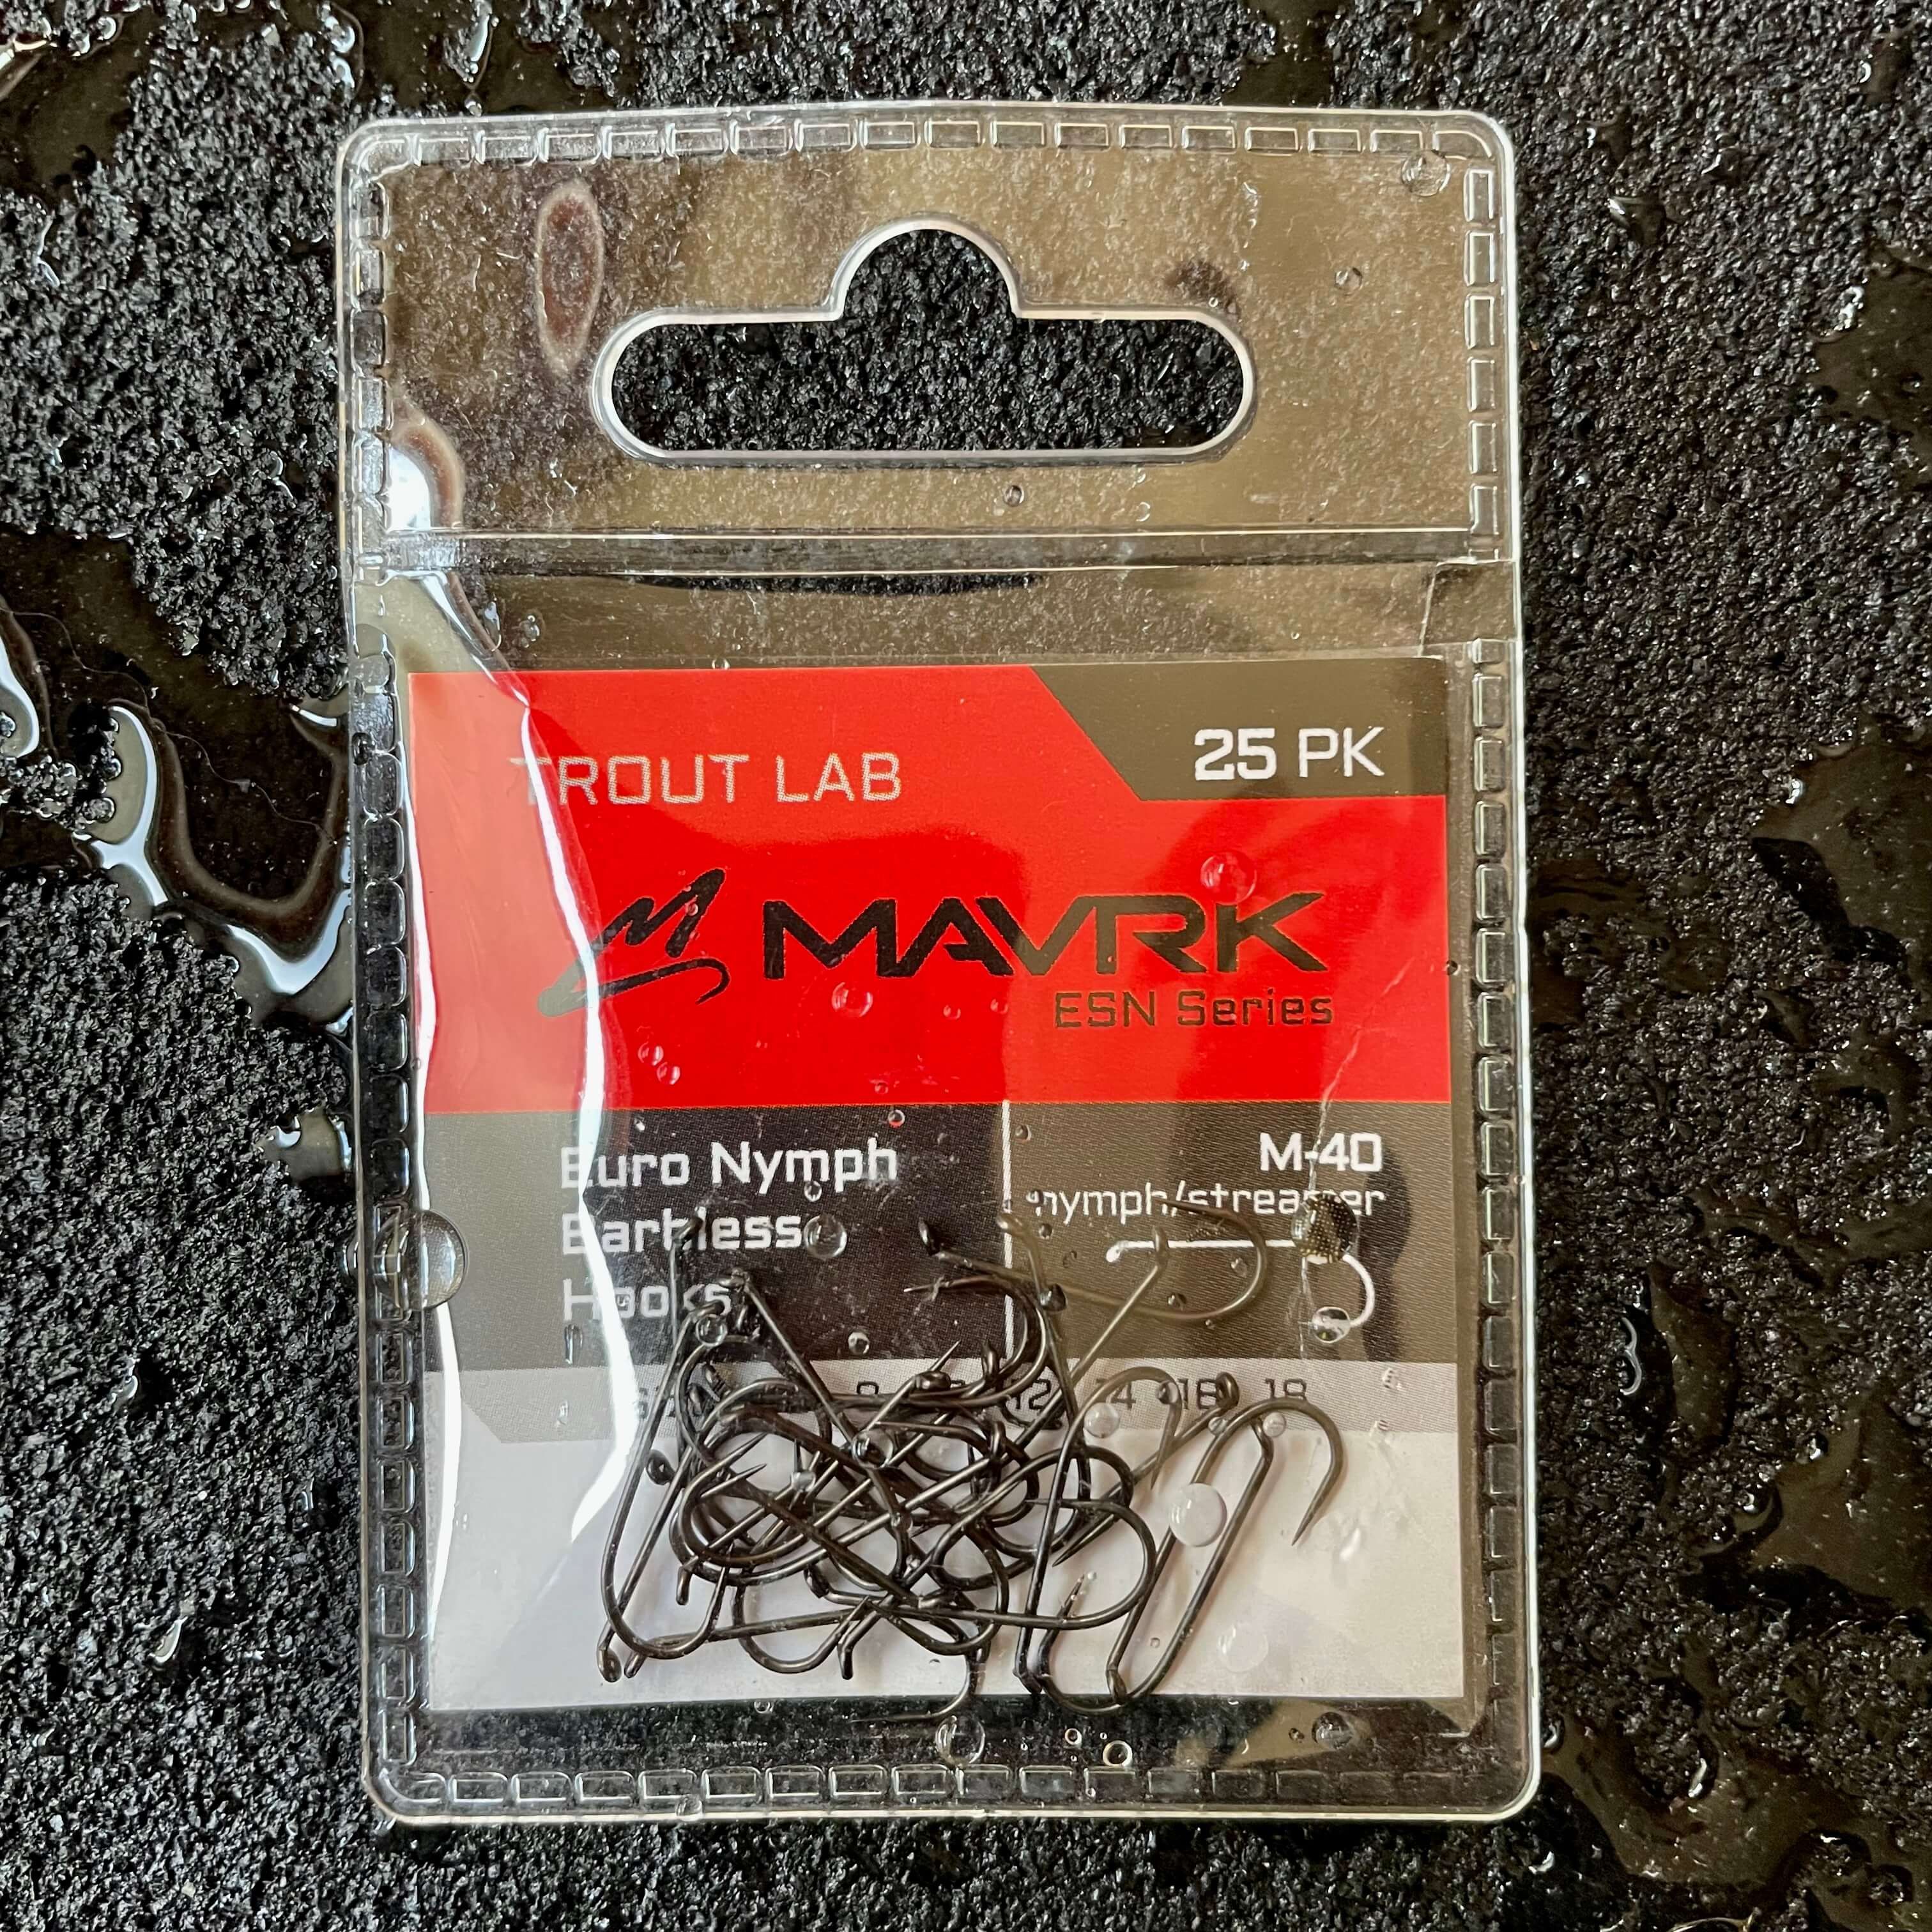 Mavrk Fly Fishing Euro Nymph Competition Barbless Hooks 25 Pack for Fly Tying Black Nickel Coating Strong Durable Chemically Sharpened Jig Curve